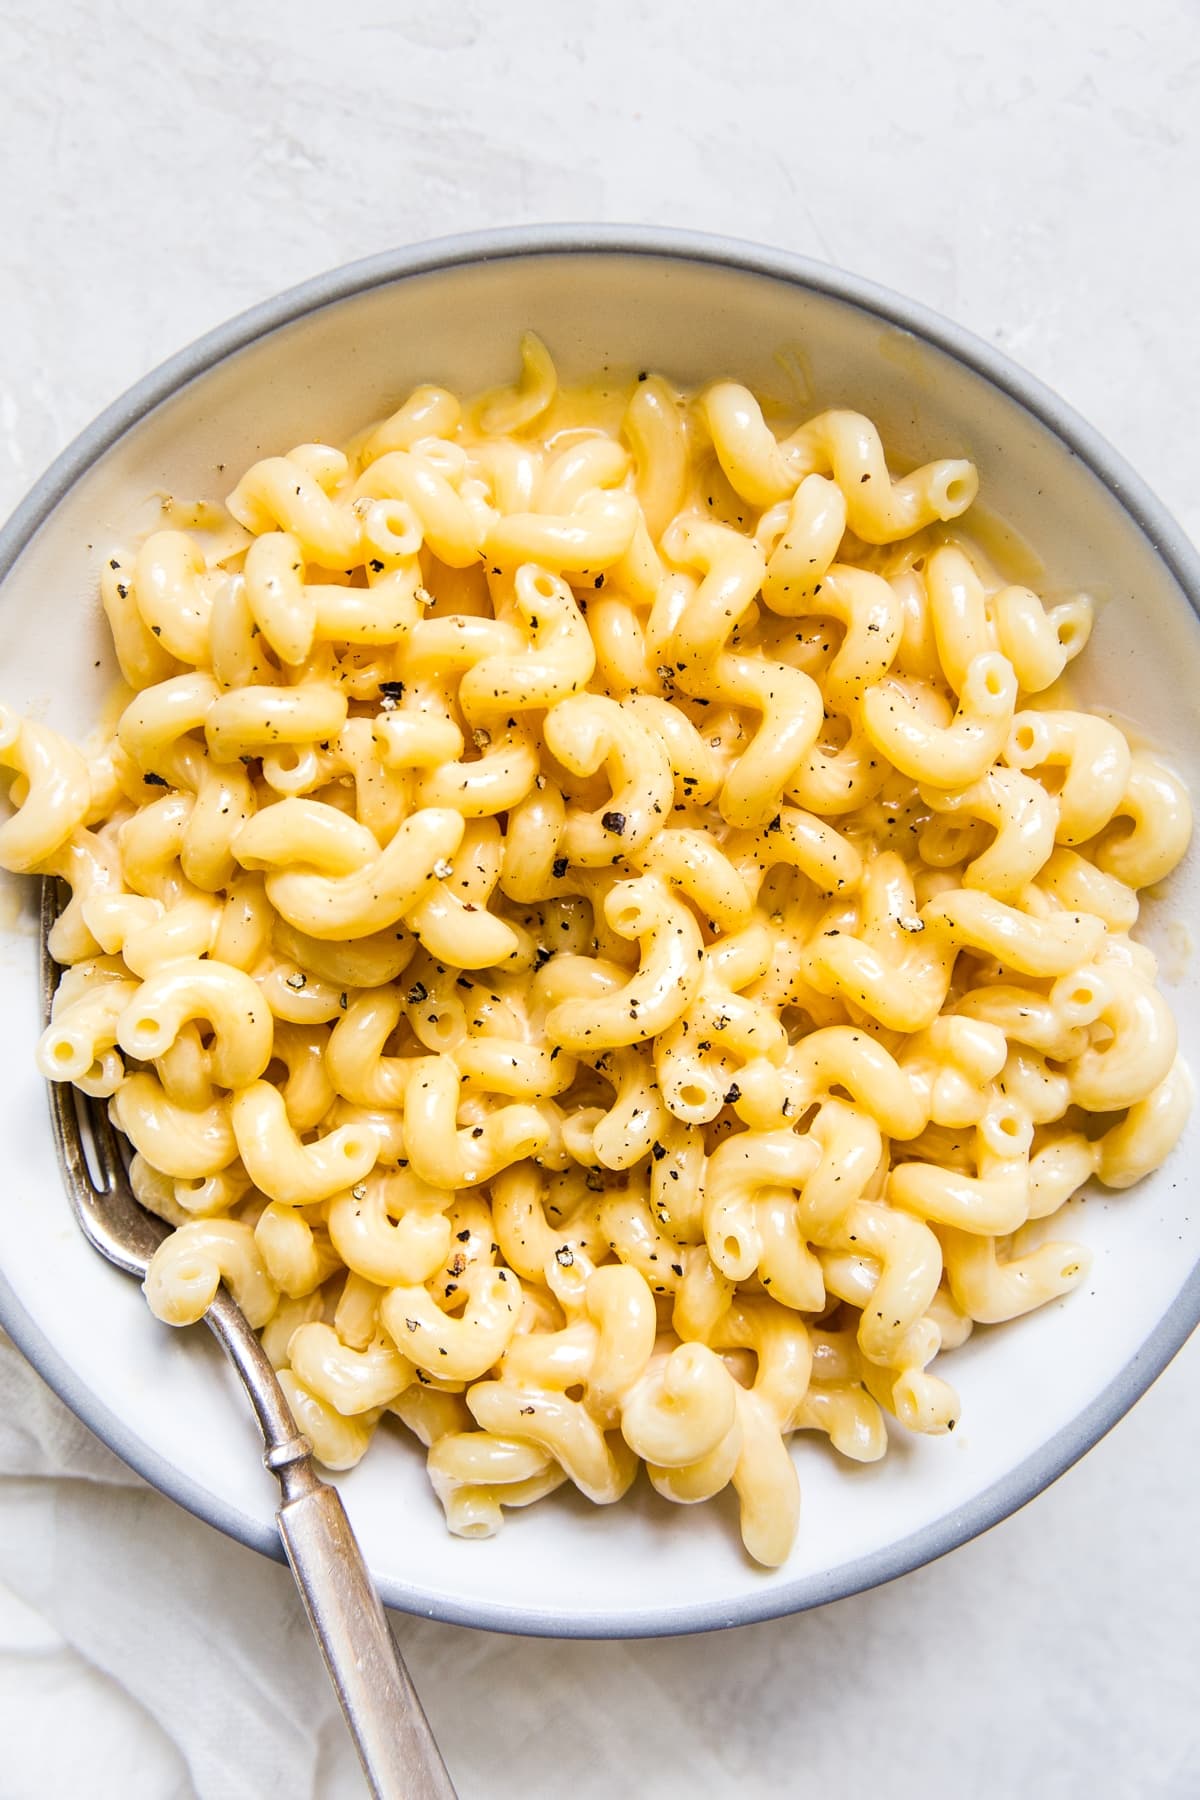 26-Ingredient Stovetop Macaroni and Cheese